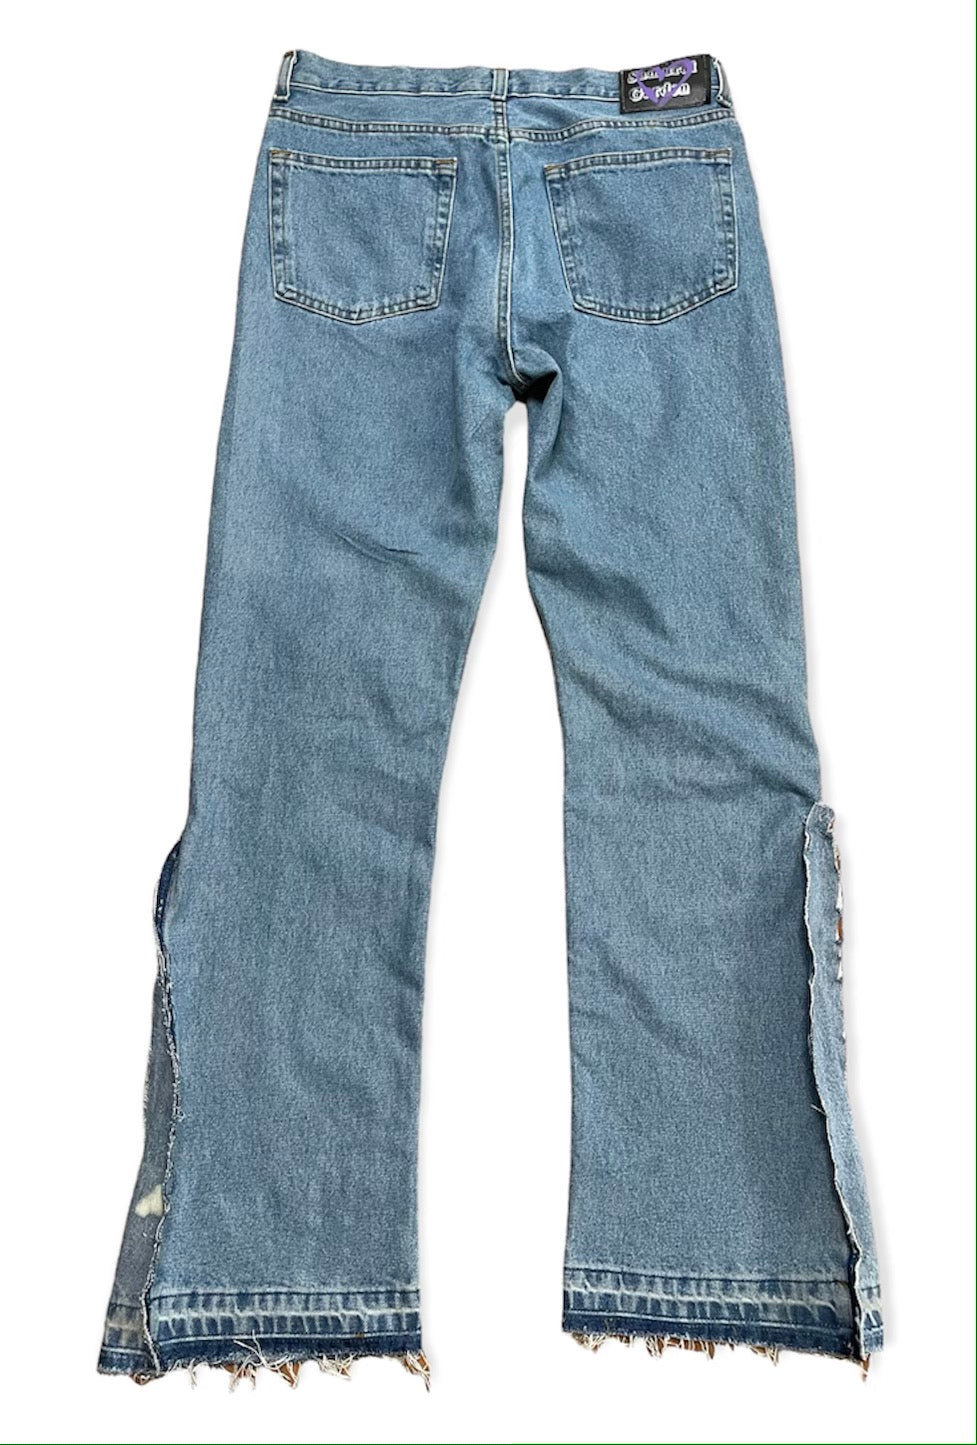 Distressed Love Jeans